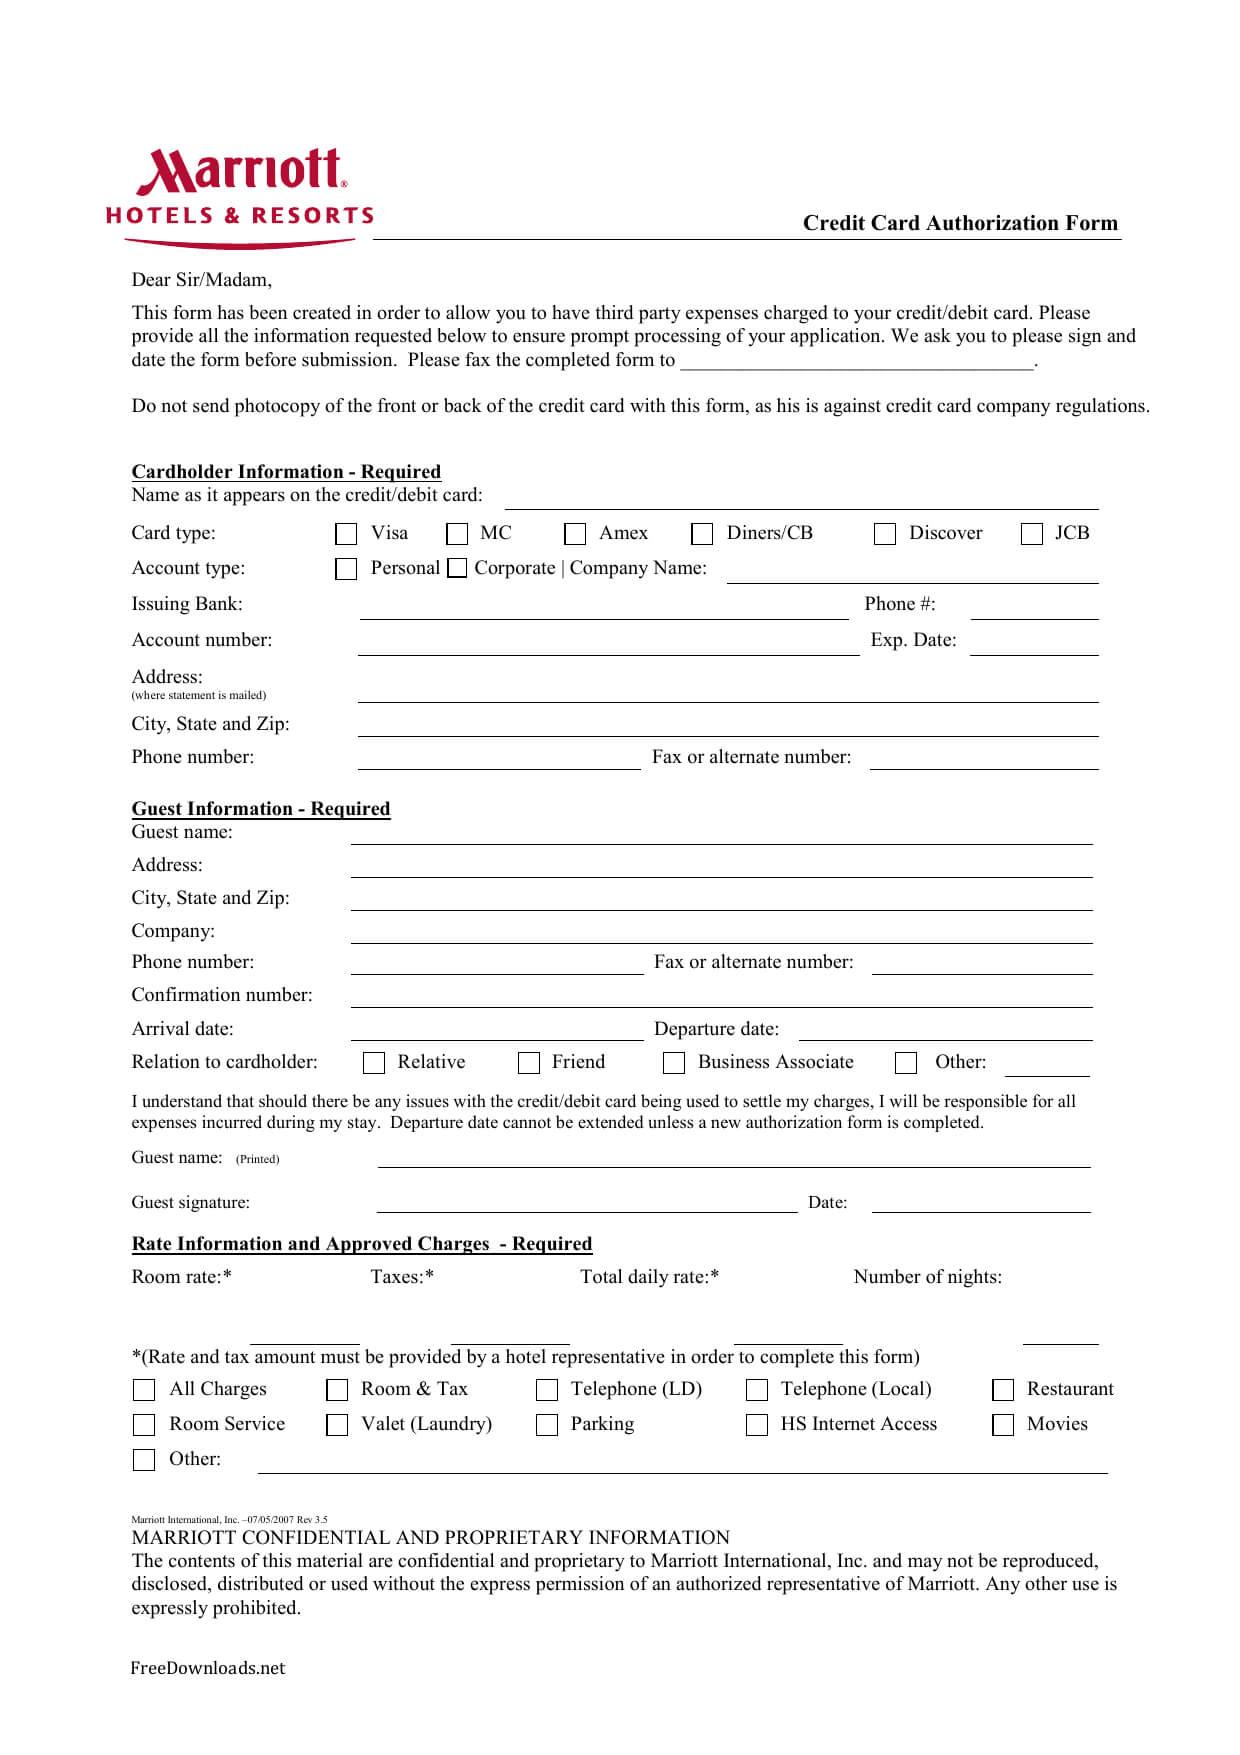 Download Marriott Credit Card Authorization Form Template Pertaining To Hotel Credit Card Authorization Form Template